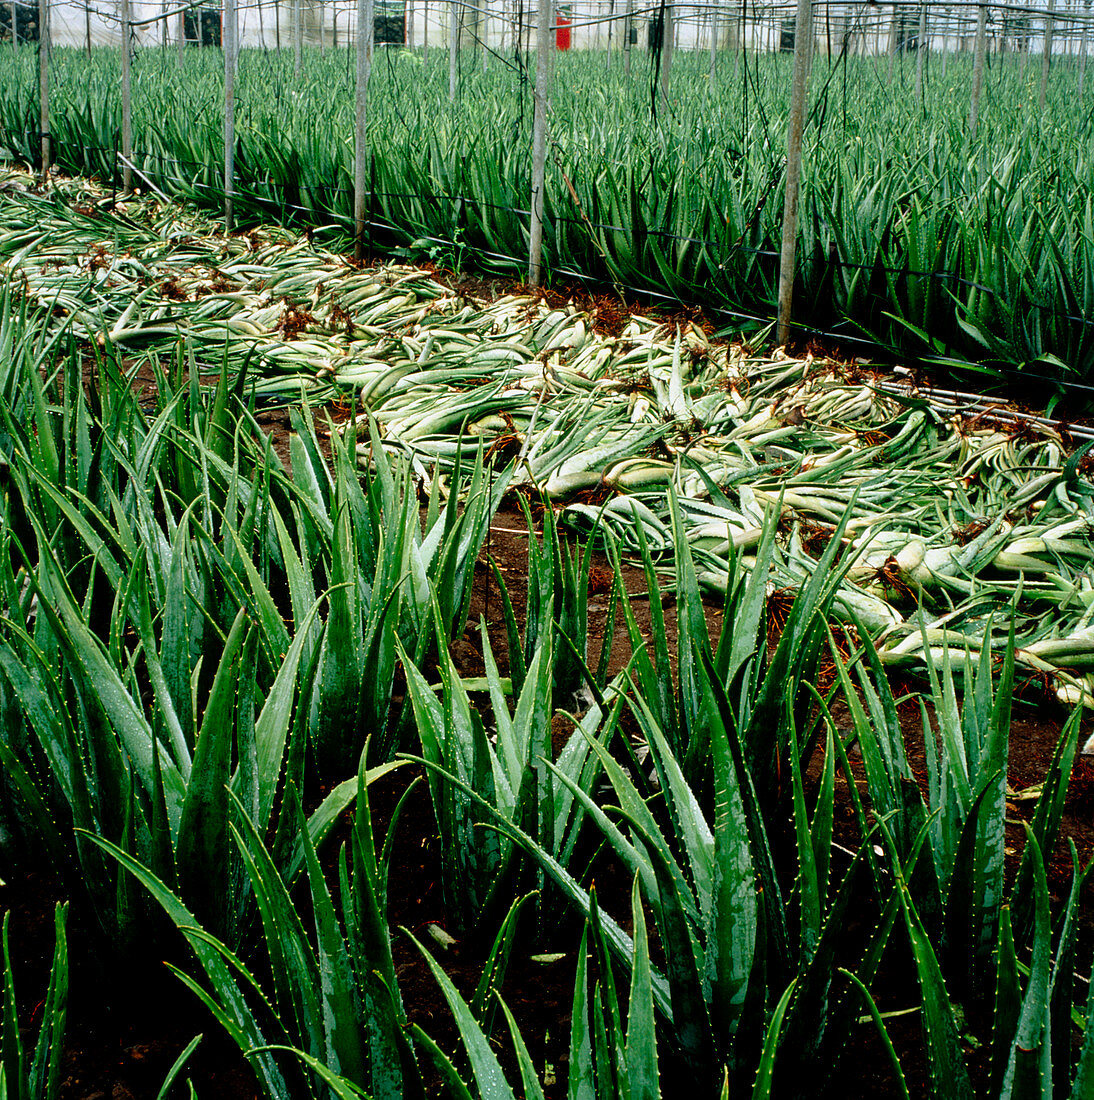 Fields of Aloe vera being harvested